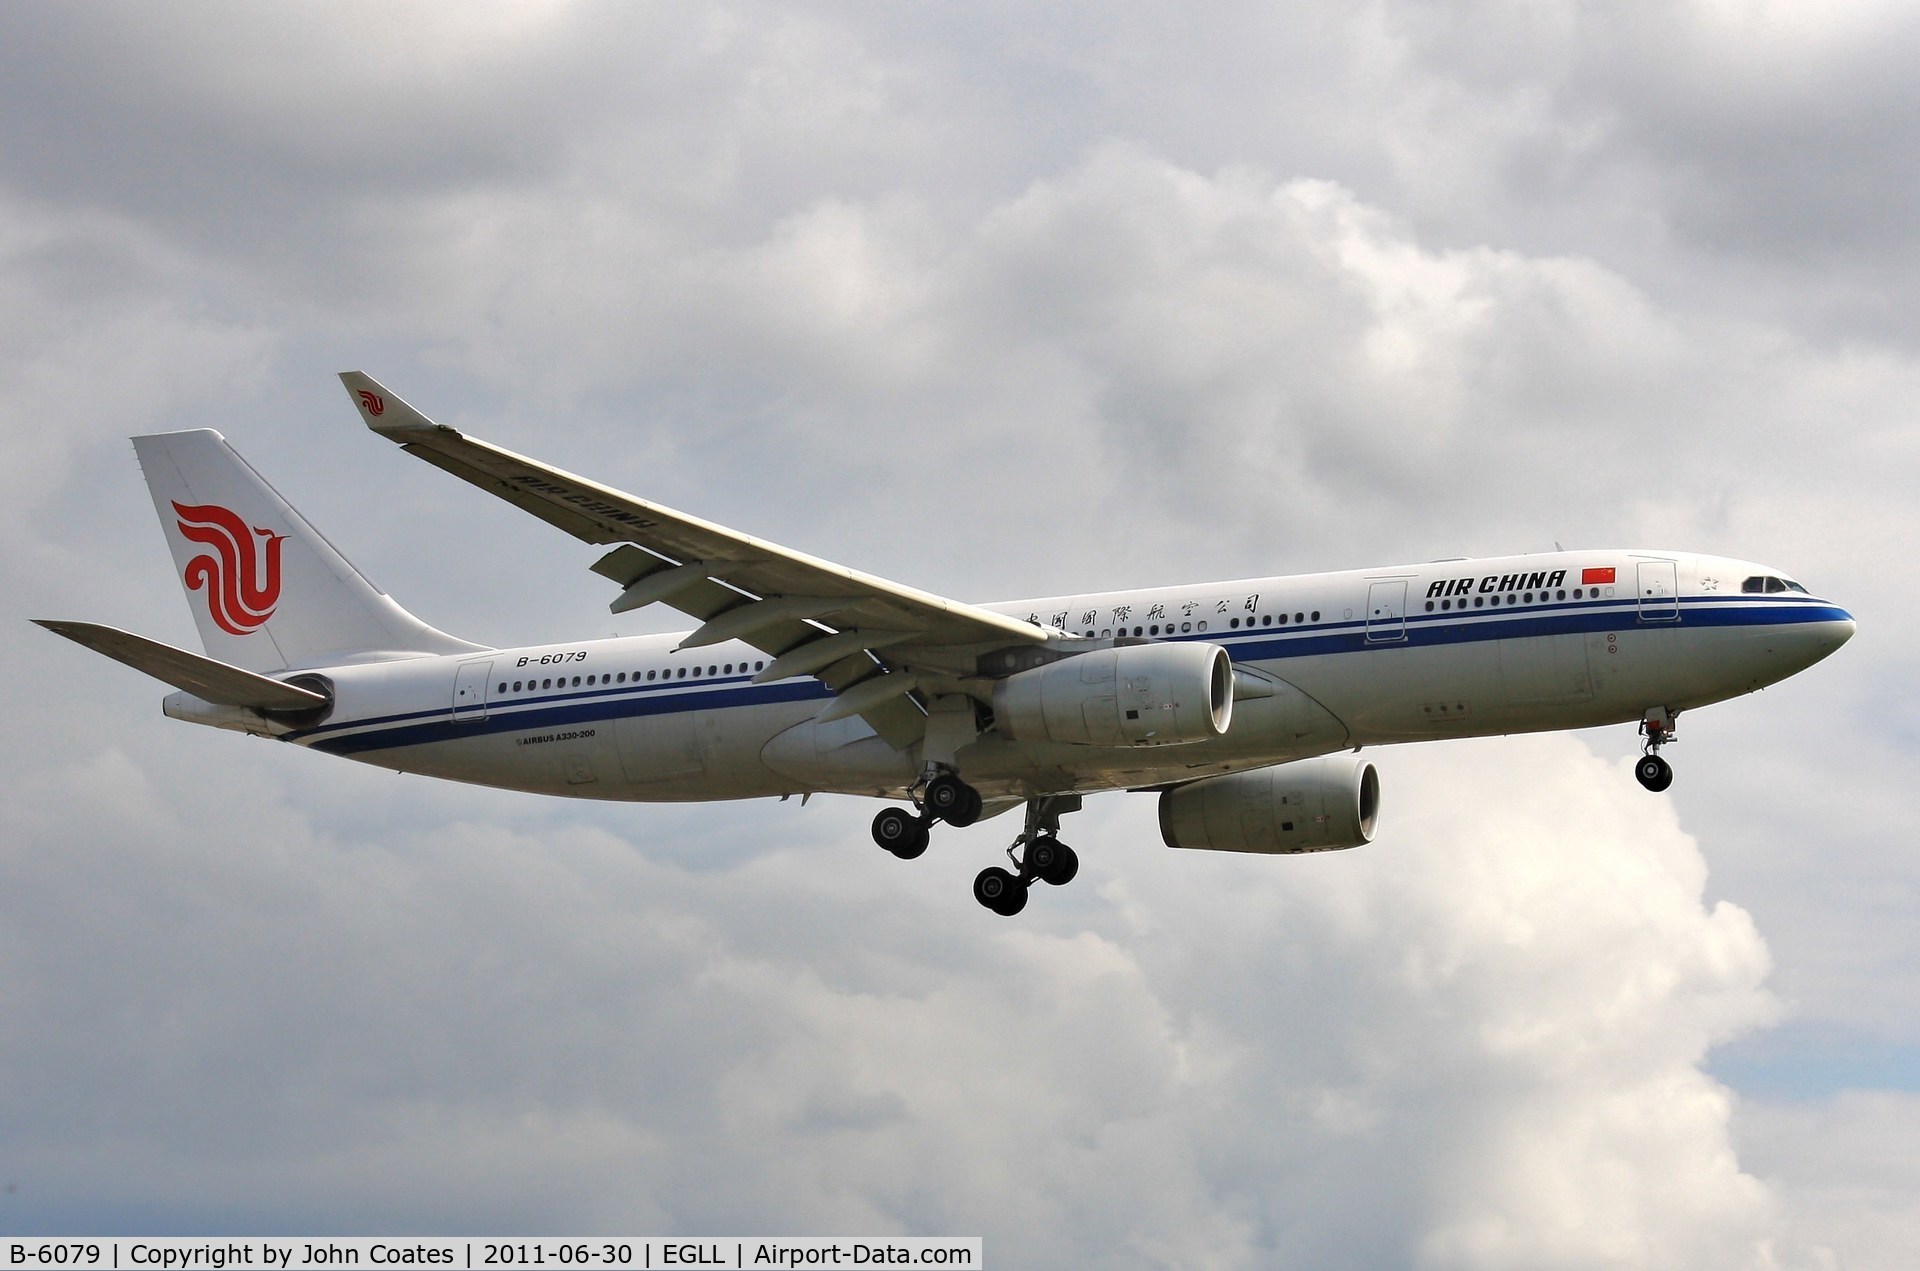 B-6079, 2006 Airbus A330-243 C/N 810, Evening finals to 27R